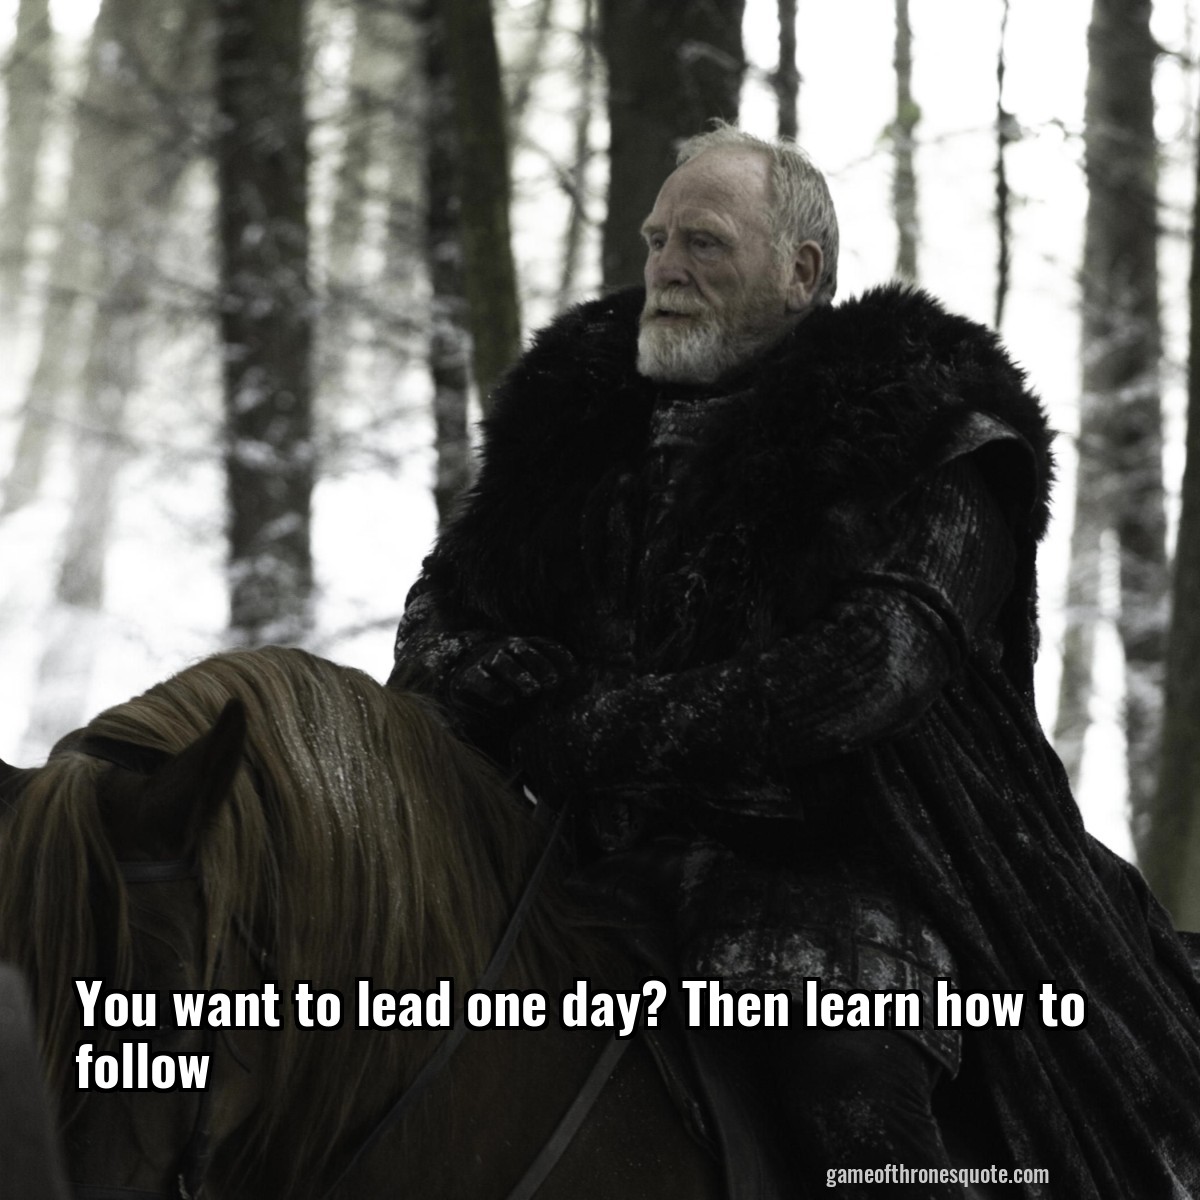 You want to lead one day? Then learn how to follow